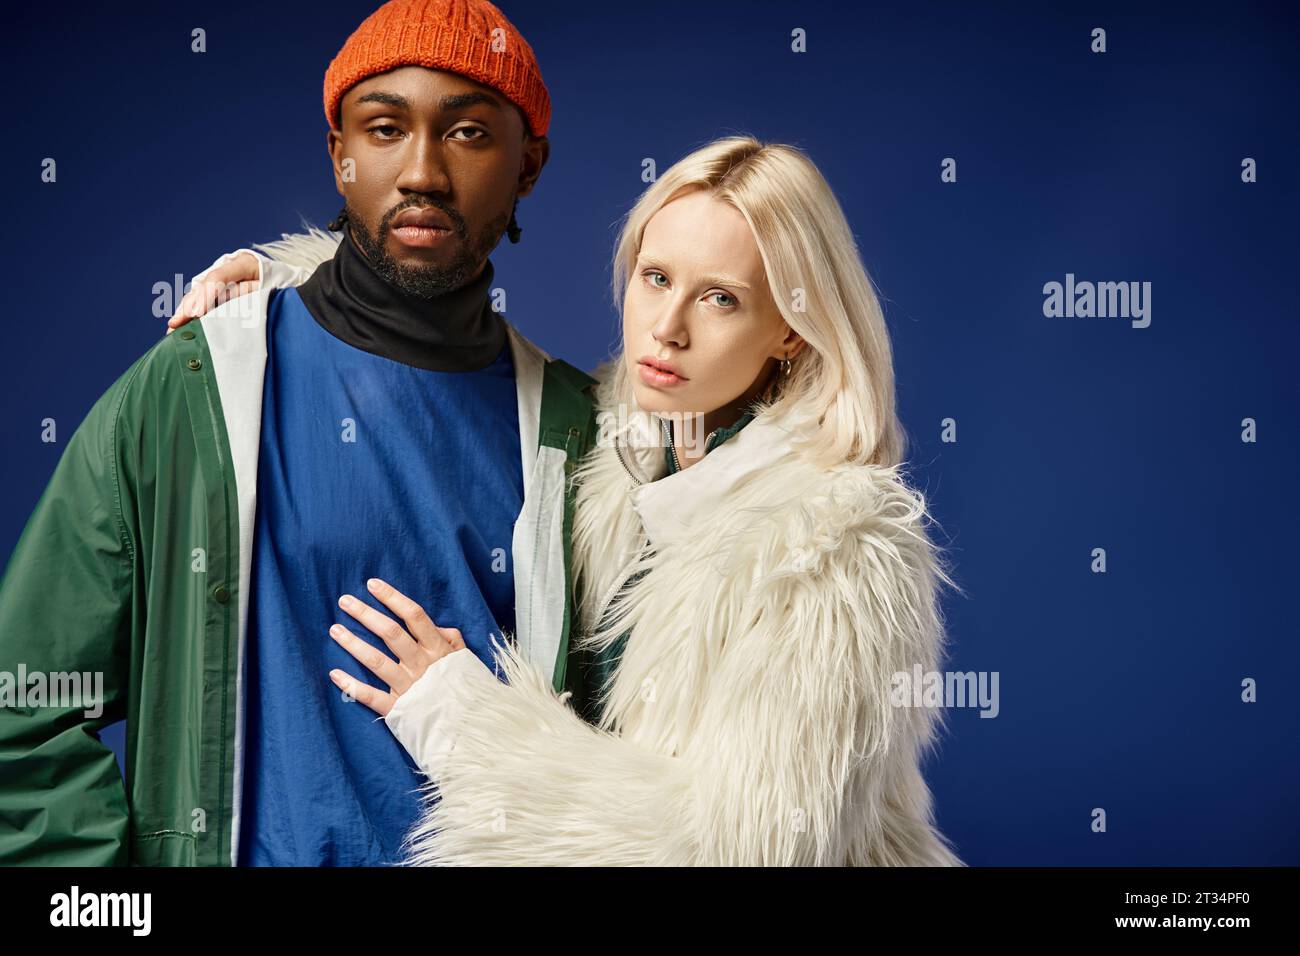 young woman embracing african american man in winter attire of blue backdrop, multiethnic couple Stock Photo